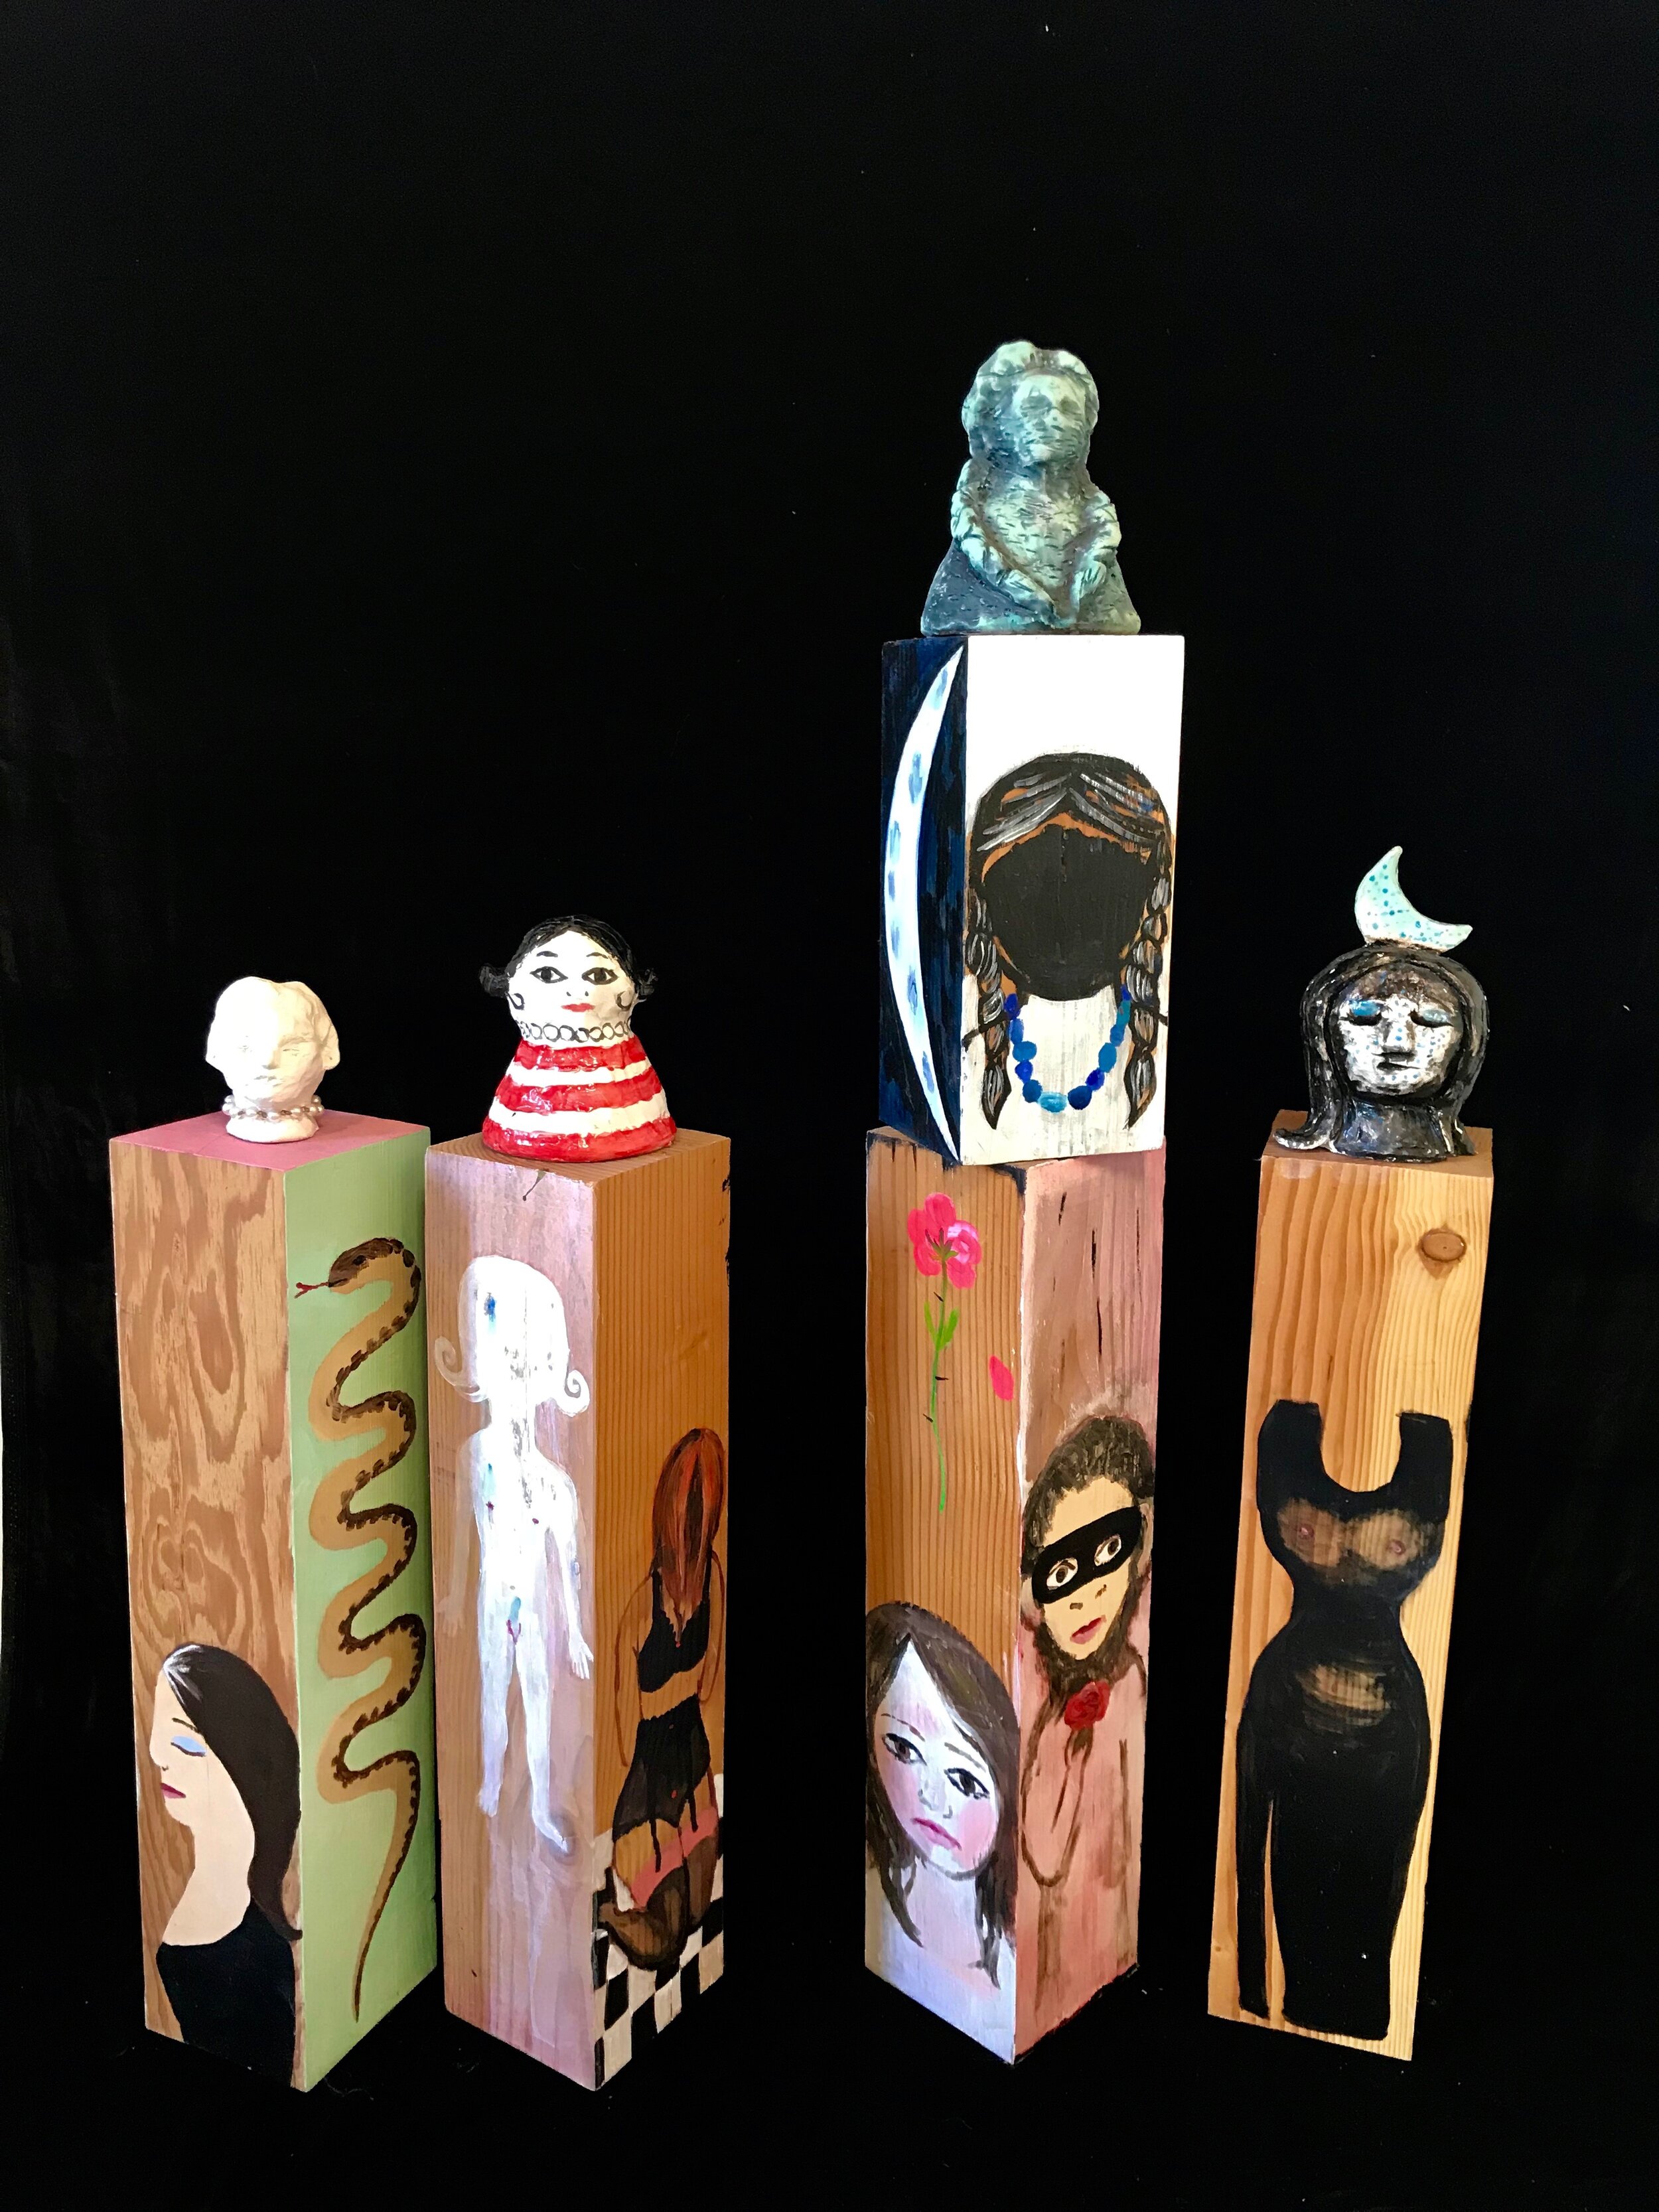 Installation of "Family Totems"